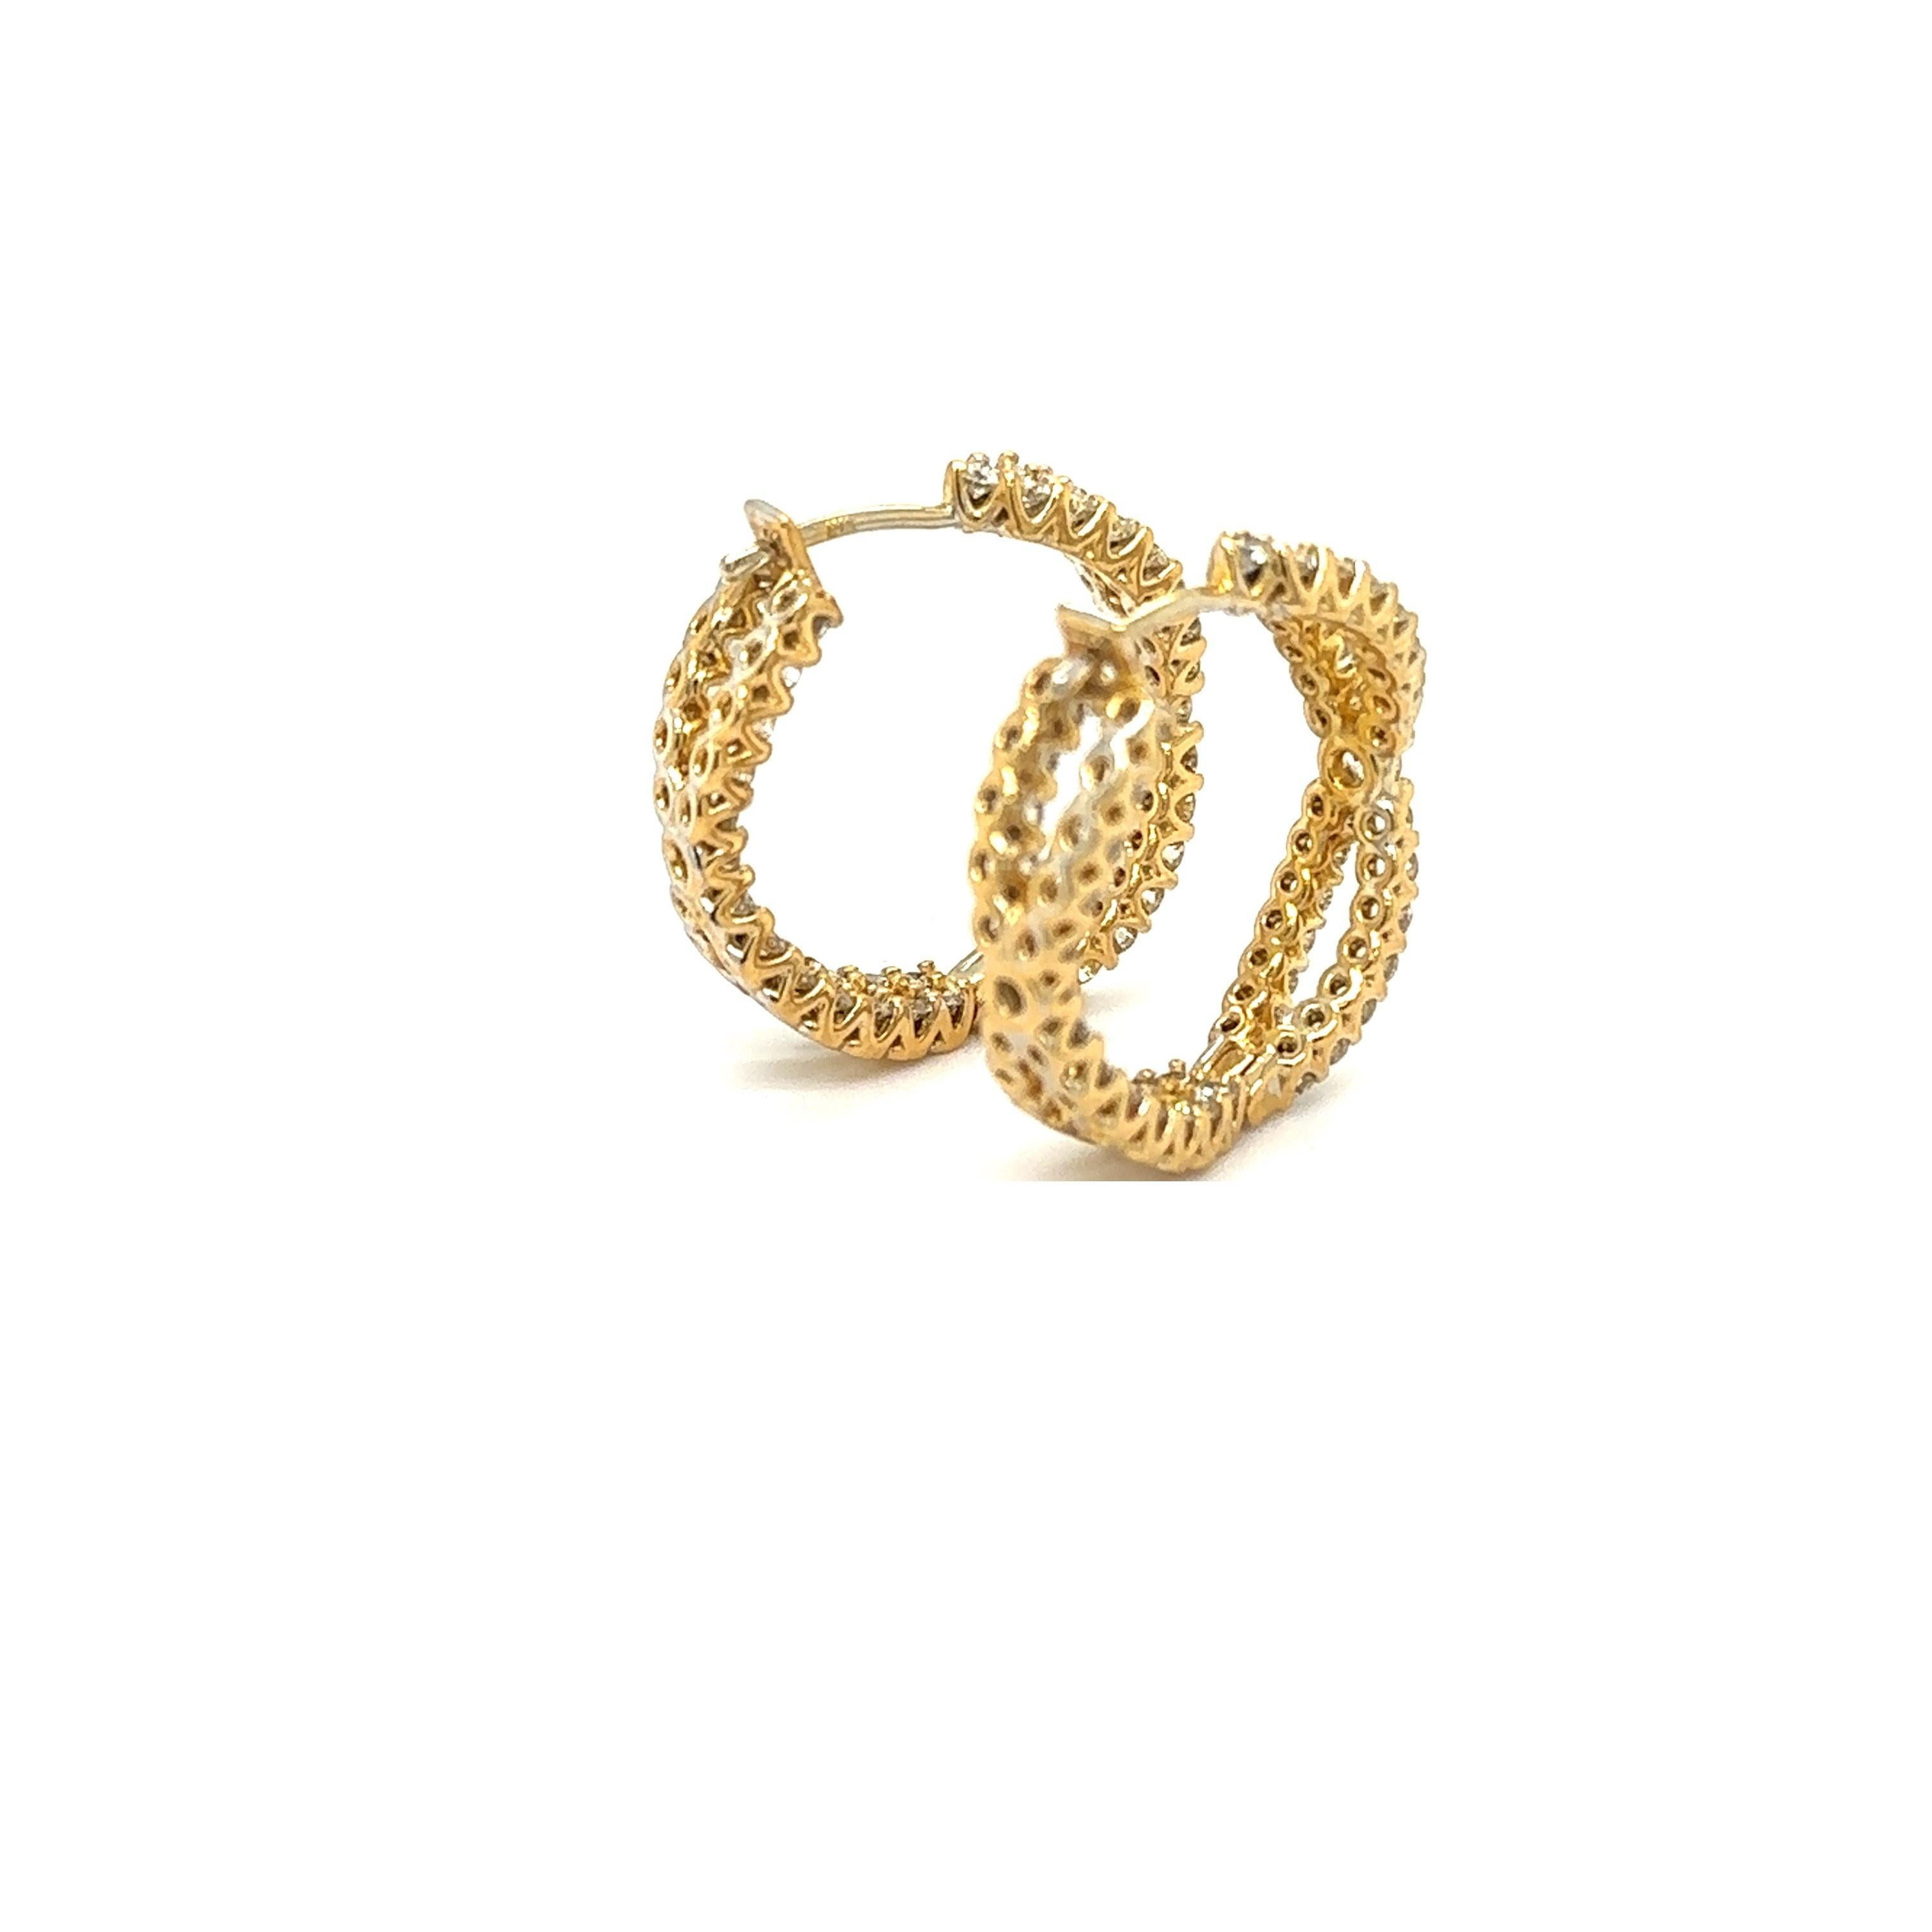 18K Yellow Gold Hoop Earrings with Diamonds

Metal:                  18K Yellow Gold
Diamond Info:    G/H VS, 110 Round Brilliant Diamonds 2.86 Cwt.
Total Ct Weight:  2.86 Cwt.
Item Weight:       9.90 gm
Measurements:  23.60 mm
